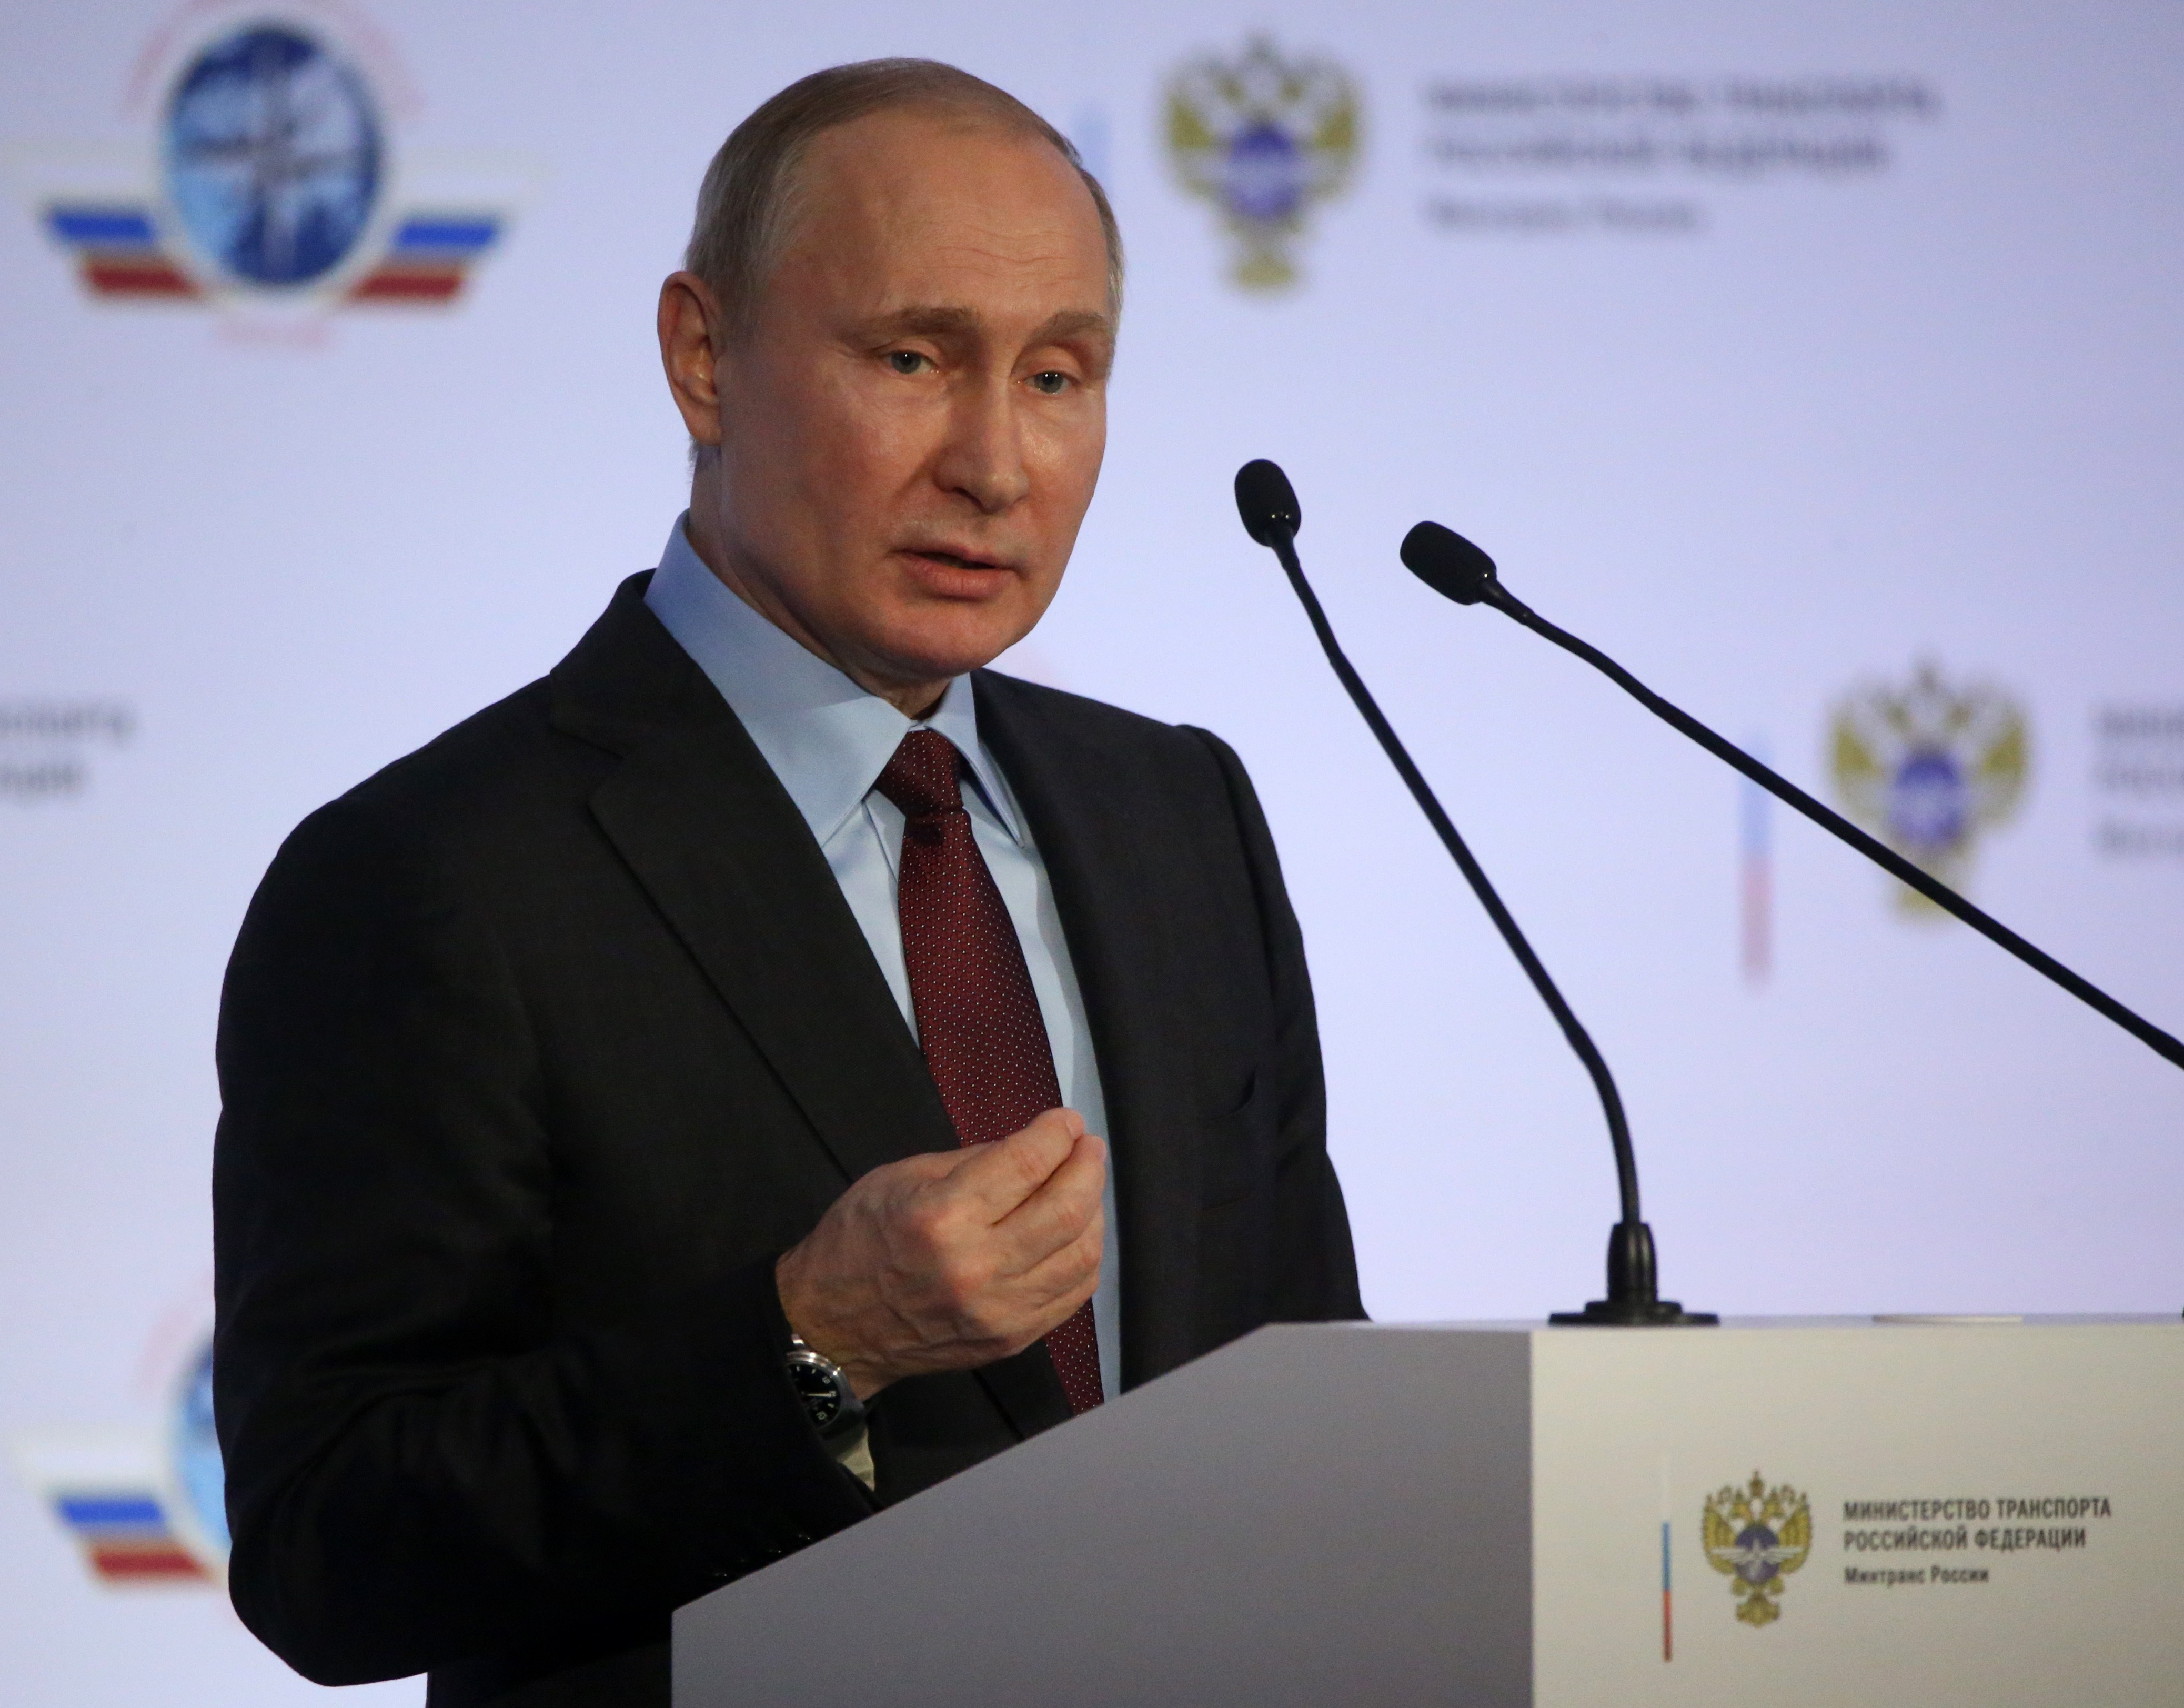 Russian President Vladimir Putin Attends the Congress of Transport Workers